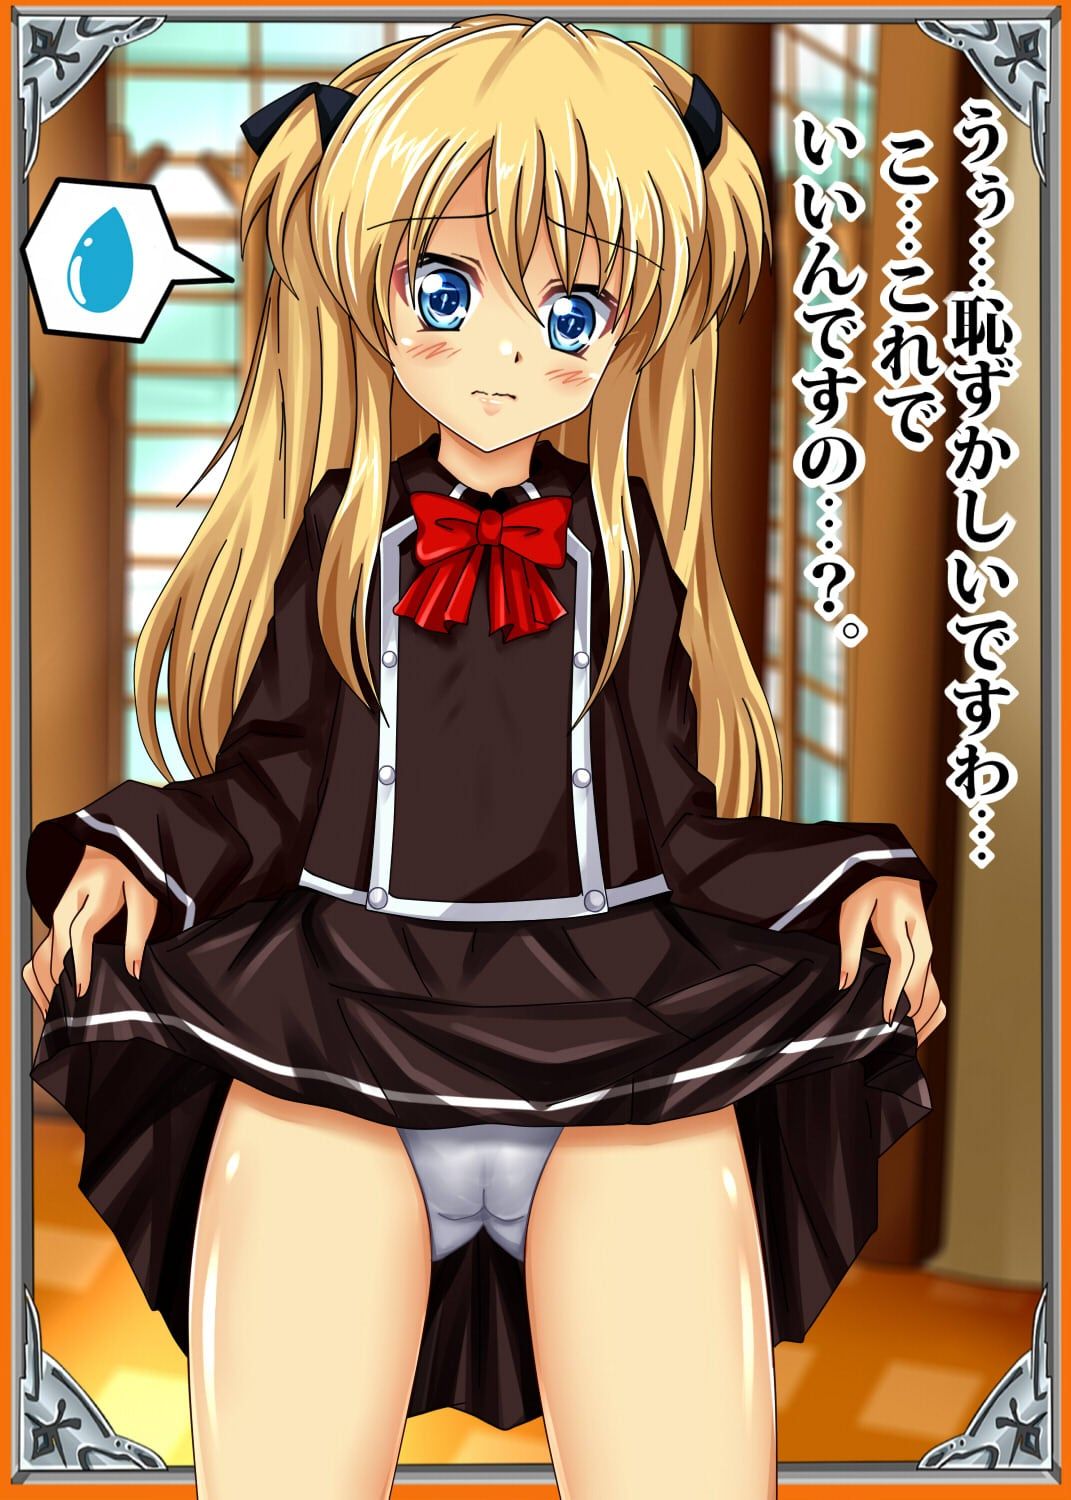 [Taku me up beautiful girl] skirt up and shy look is the best! The image that I want to raise of shame! 35